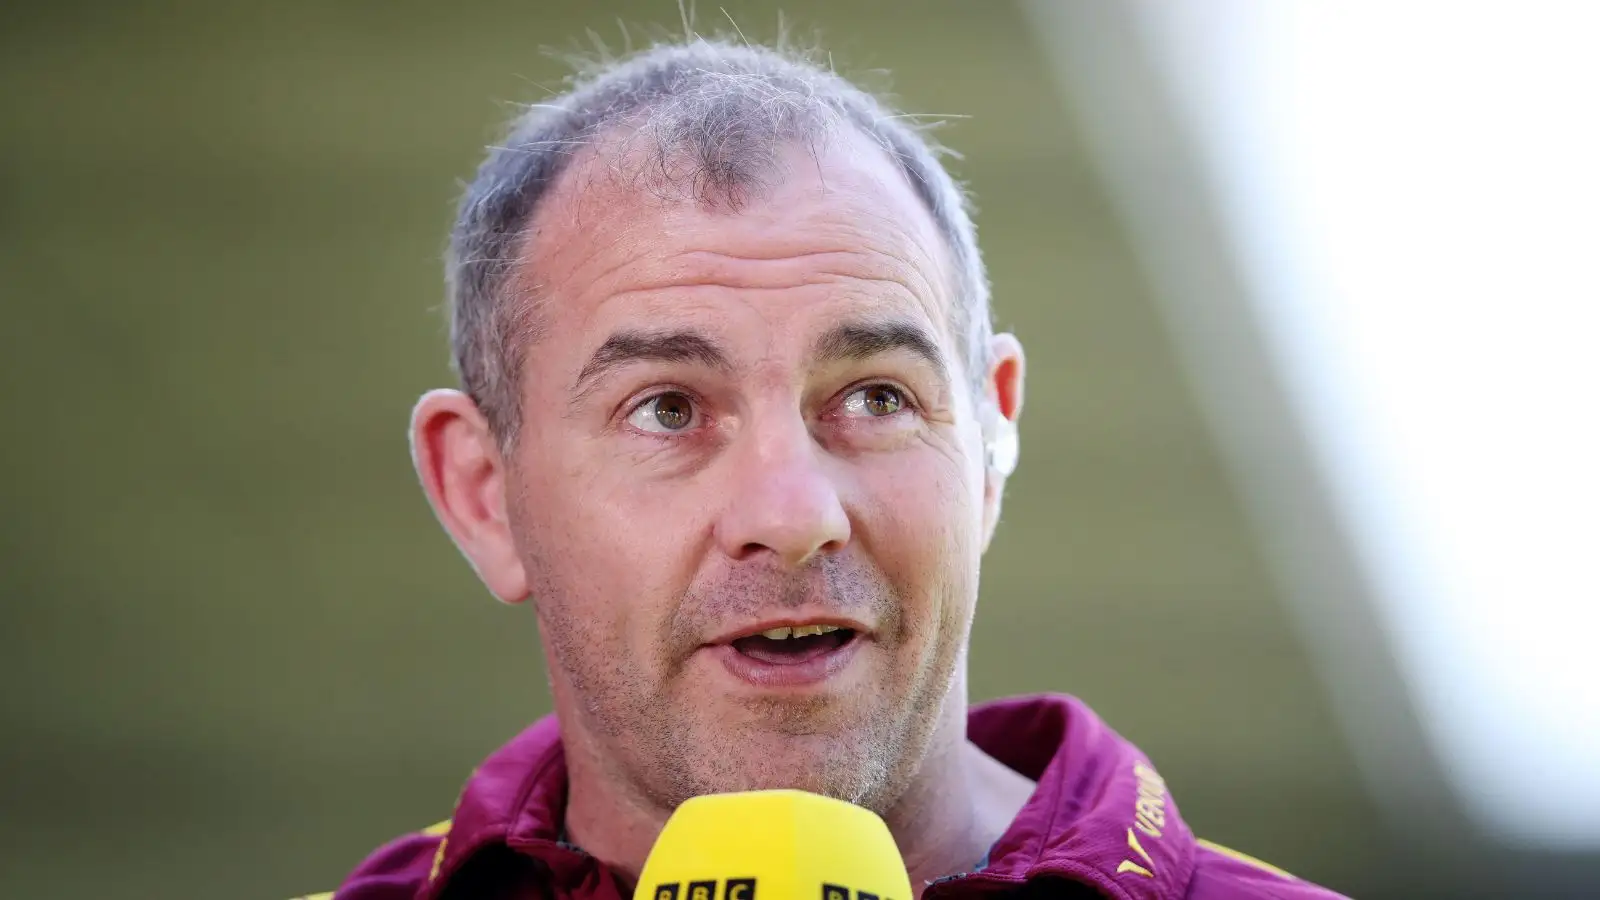 Huddersfield Giants coach confirms injury blow following Challenge Cup semi-final defeat